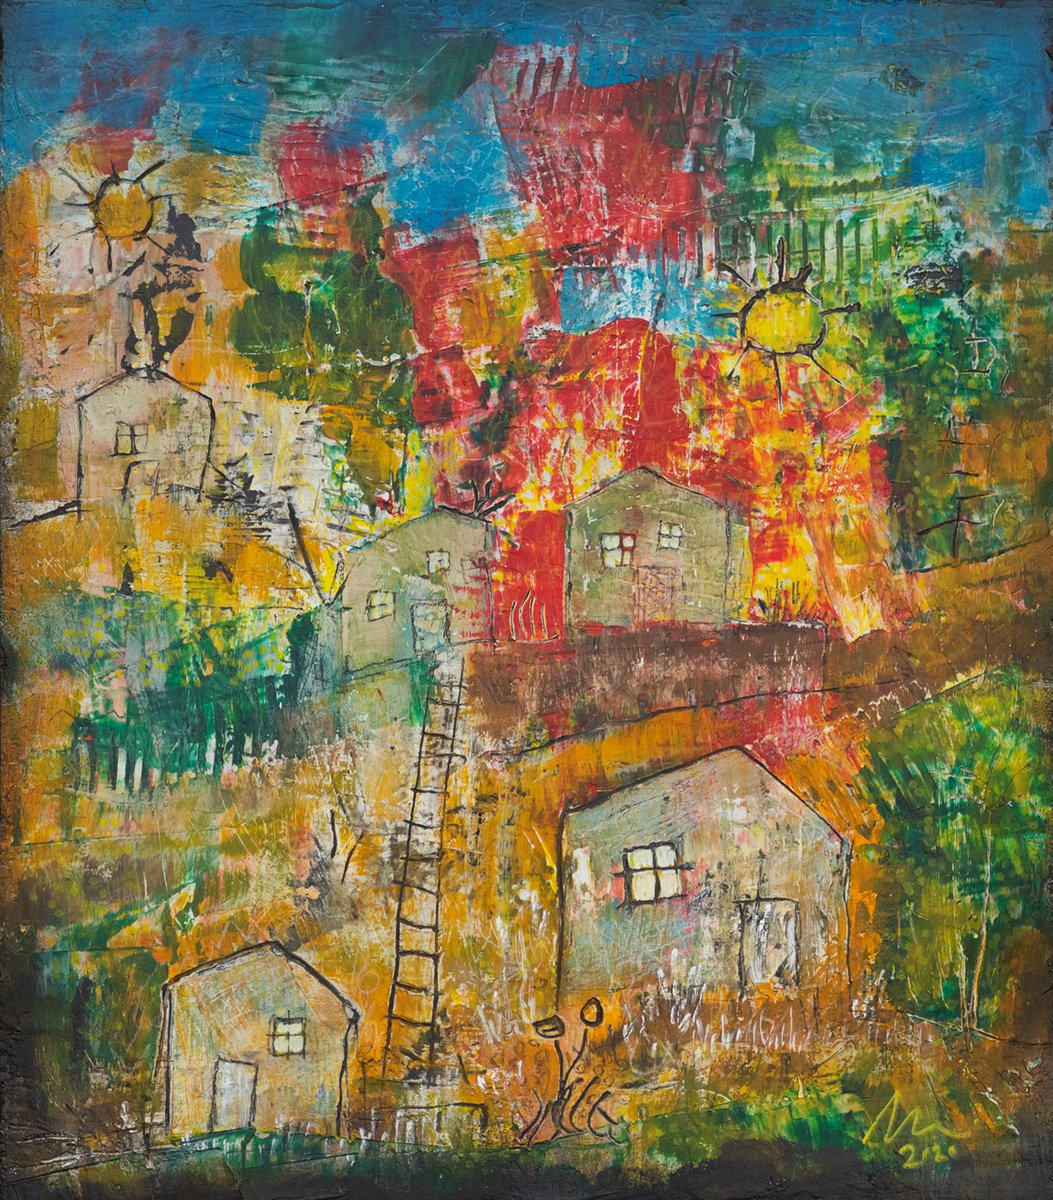 Village with two suns - art brut painting by Peter Zelei